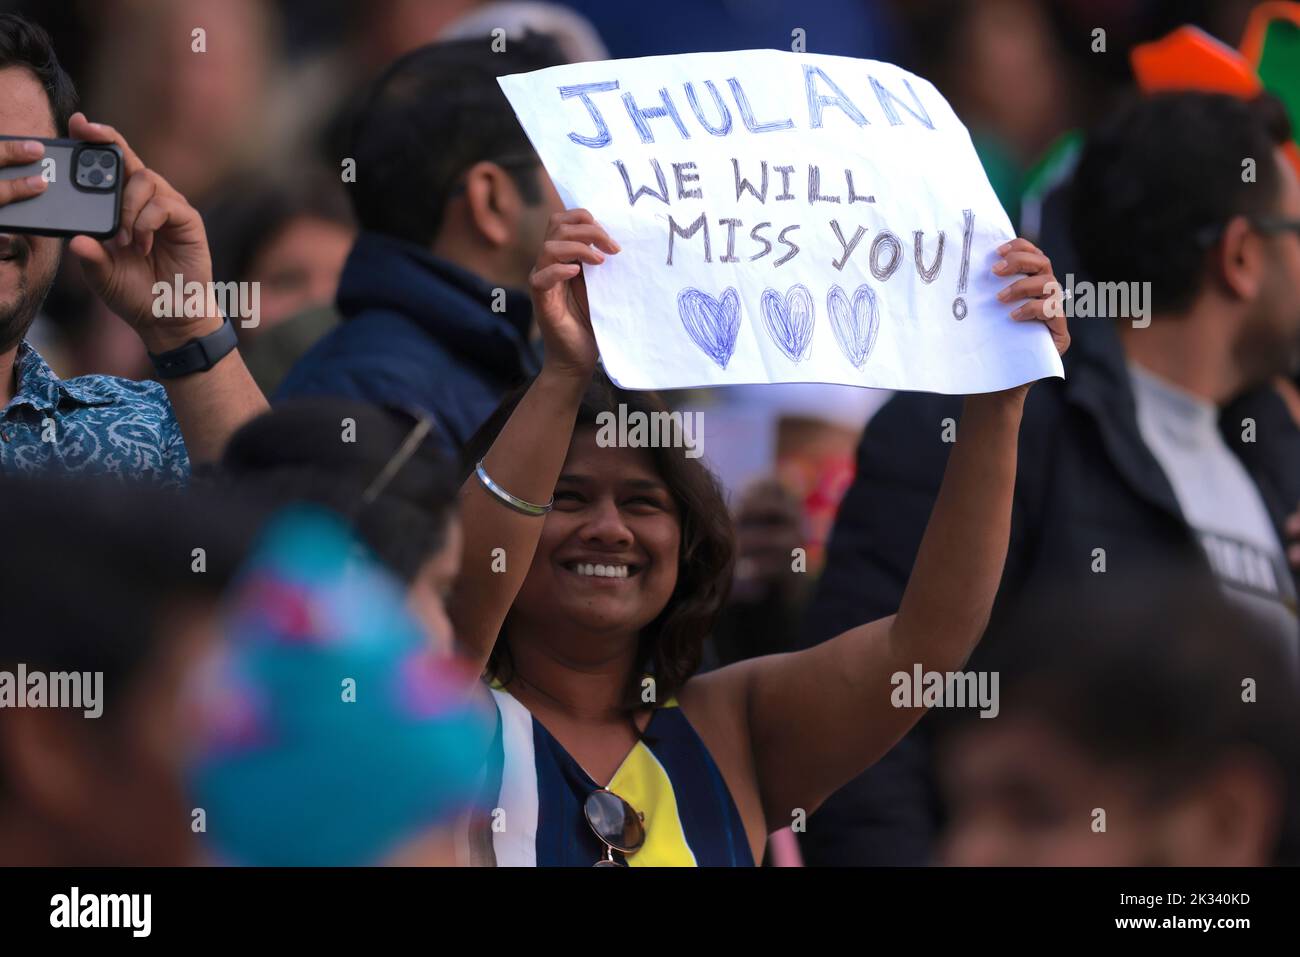 24 September , 2022, London, UK. Jhulan we will miss you. A sign in the crowd as England women take on India in the 3rd Royal London One Day International at Lords. David Rowe/Alamy Live News. Stock Photo